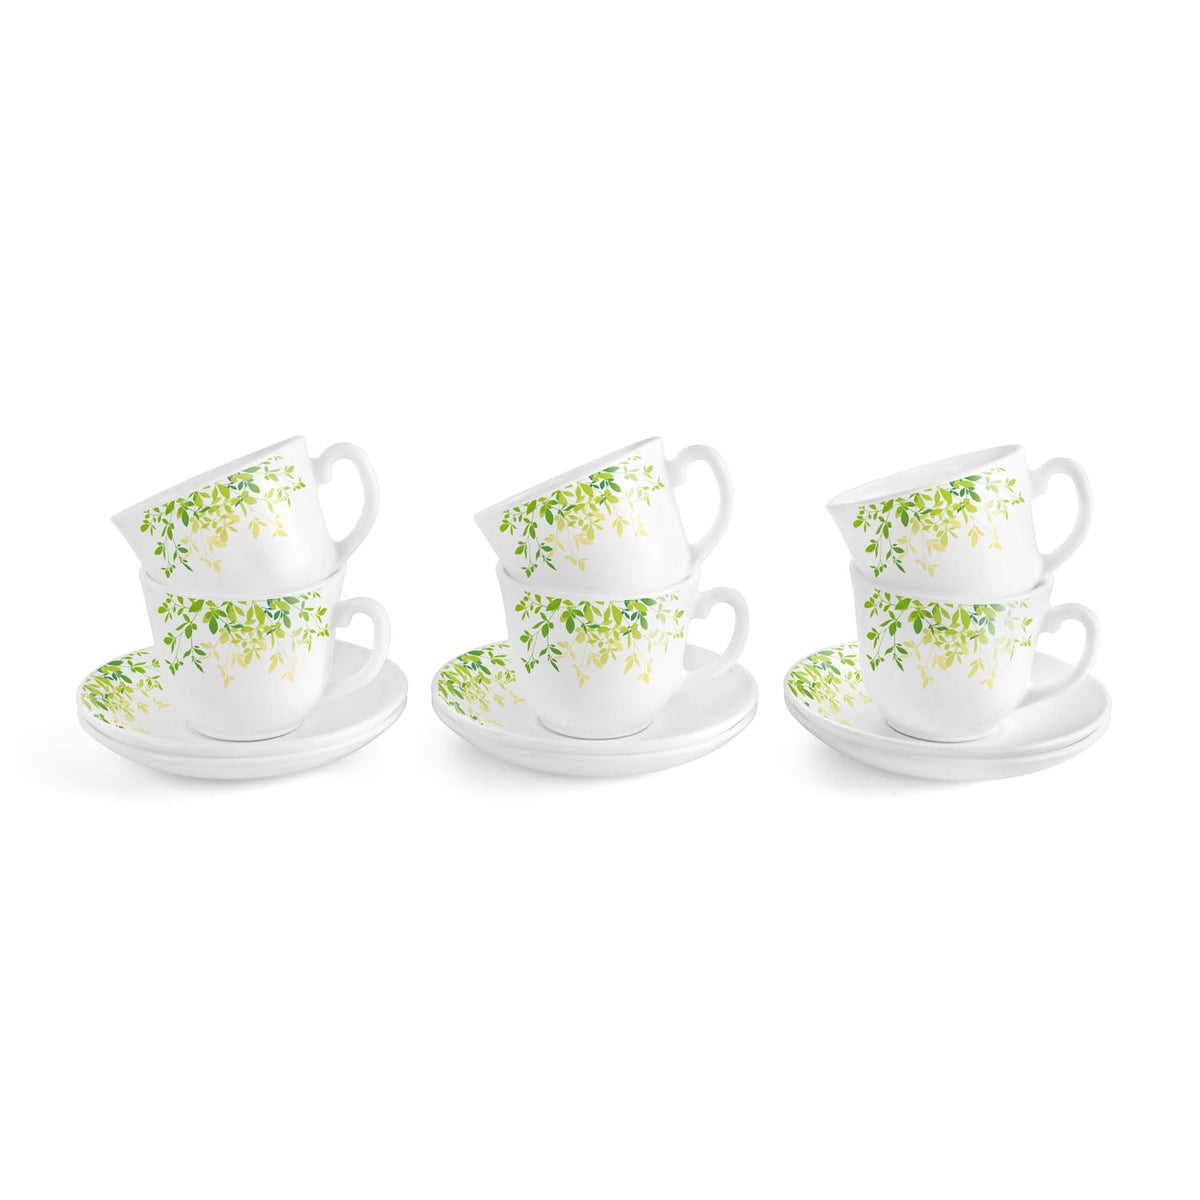 Royale Green Orchard 6 Pieces Costa Cup & Saucer Regular / 6 Pieces